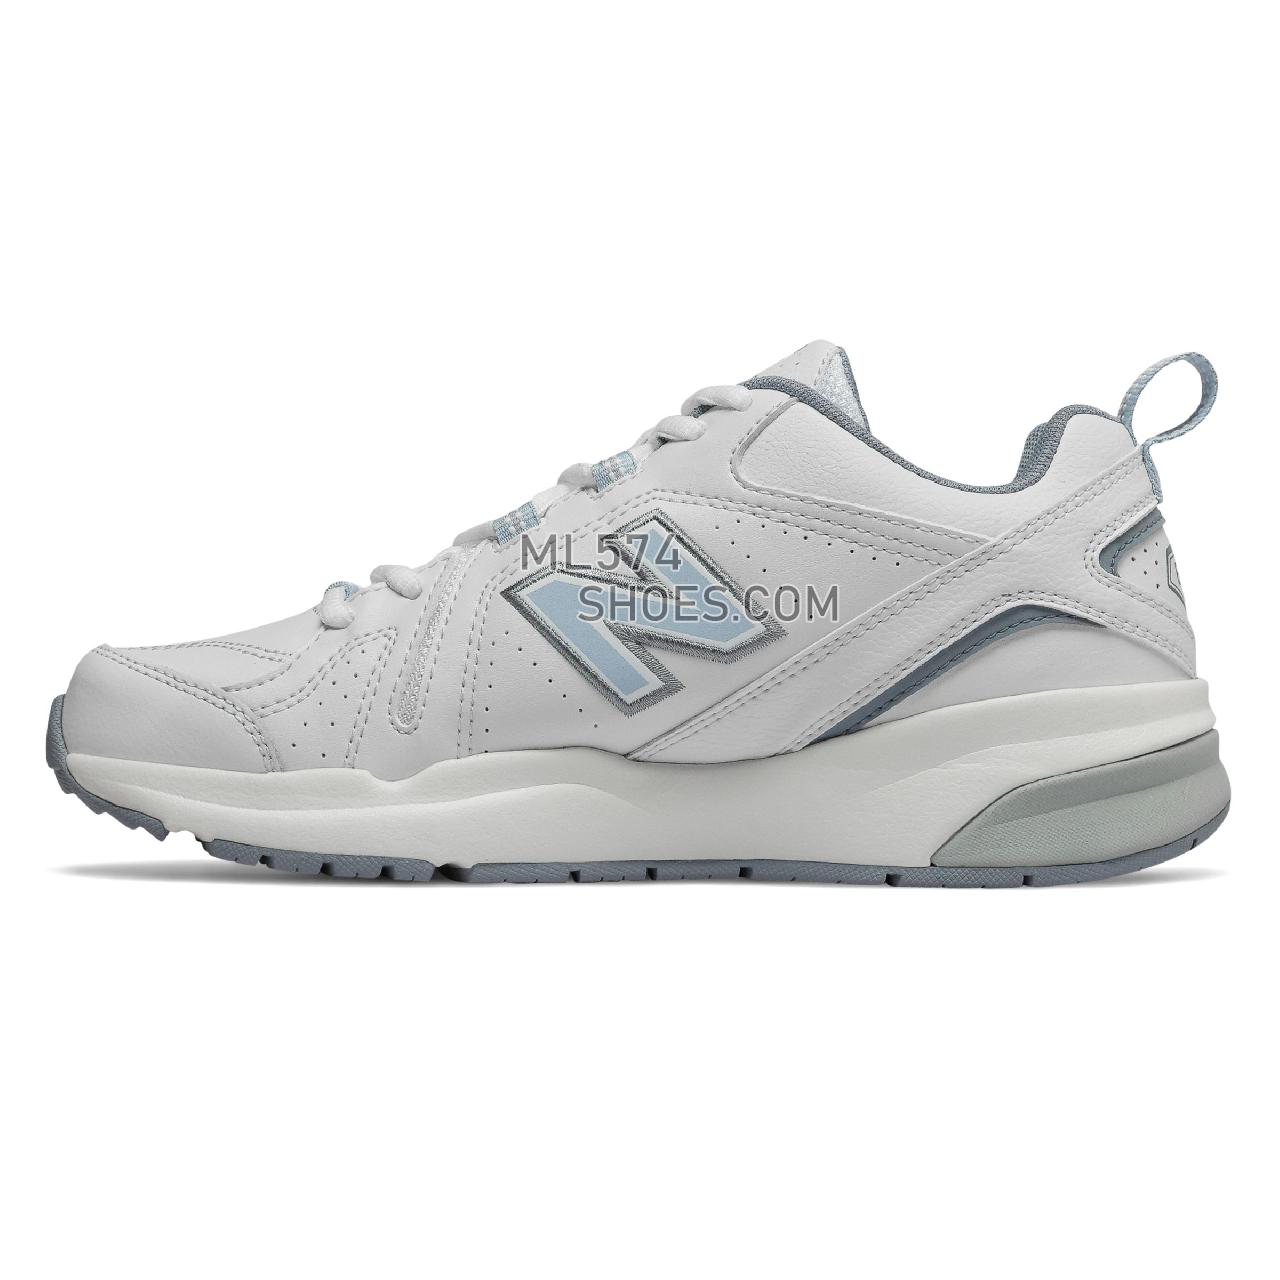 New Balance 608v5 - Women's Everyday Trainers - White with Light Blue - WX608WB5